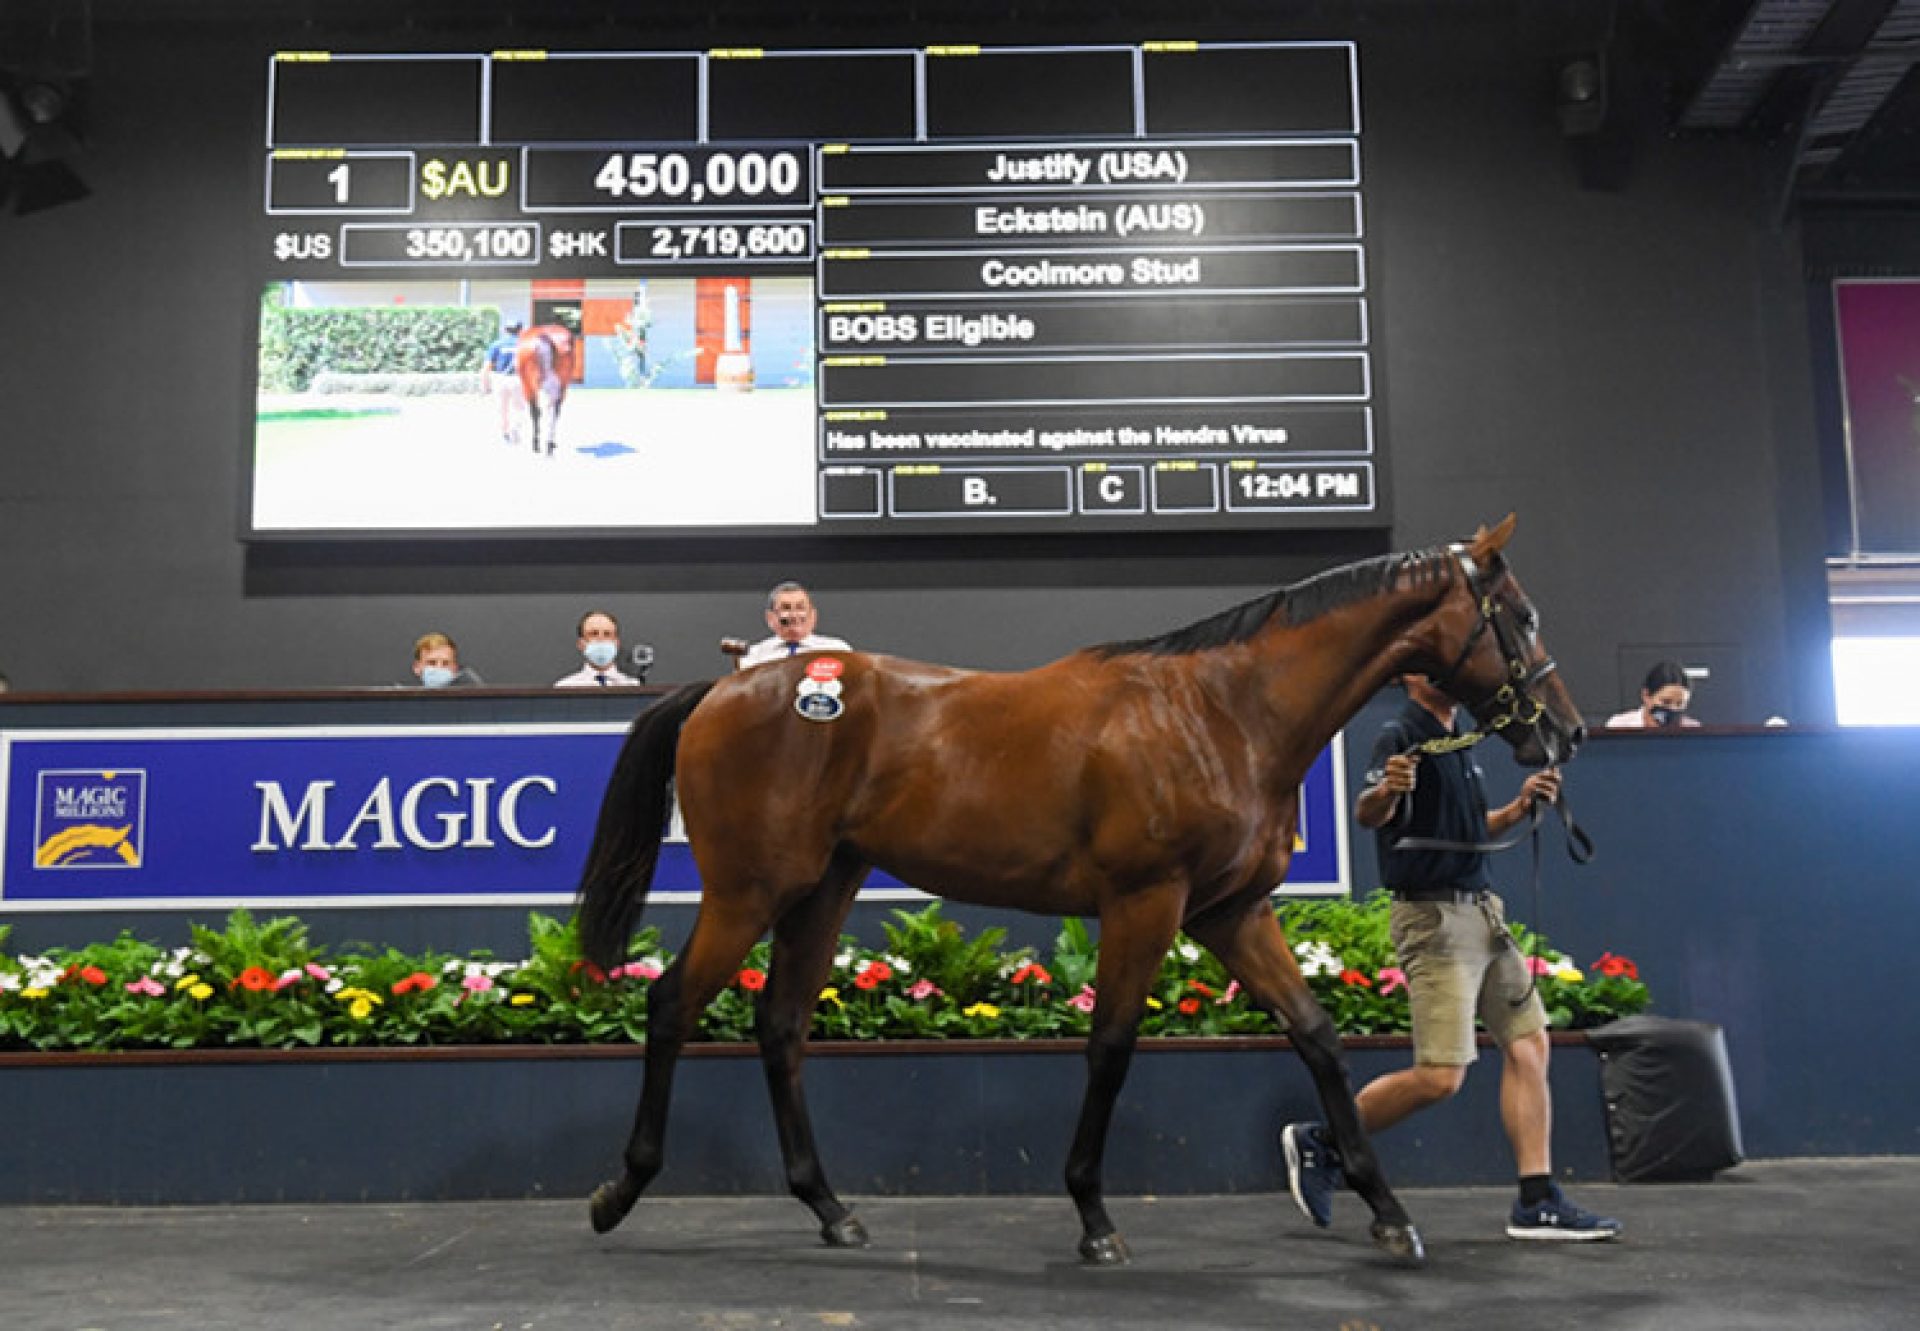 Justify X Eckstein yearling filly selling for $450,000 at the Magic Millions